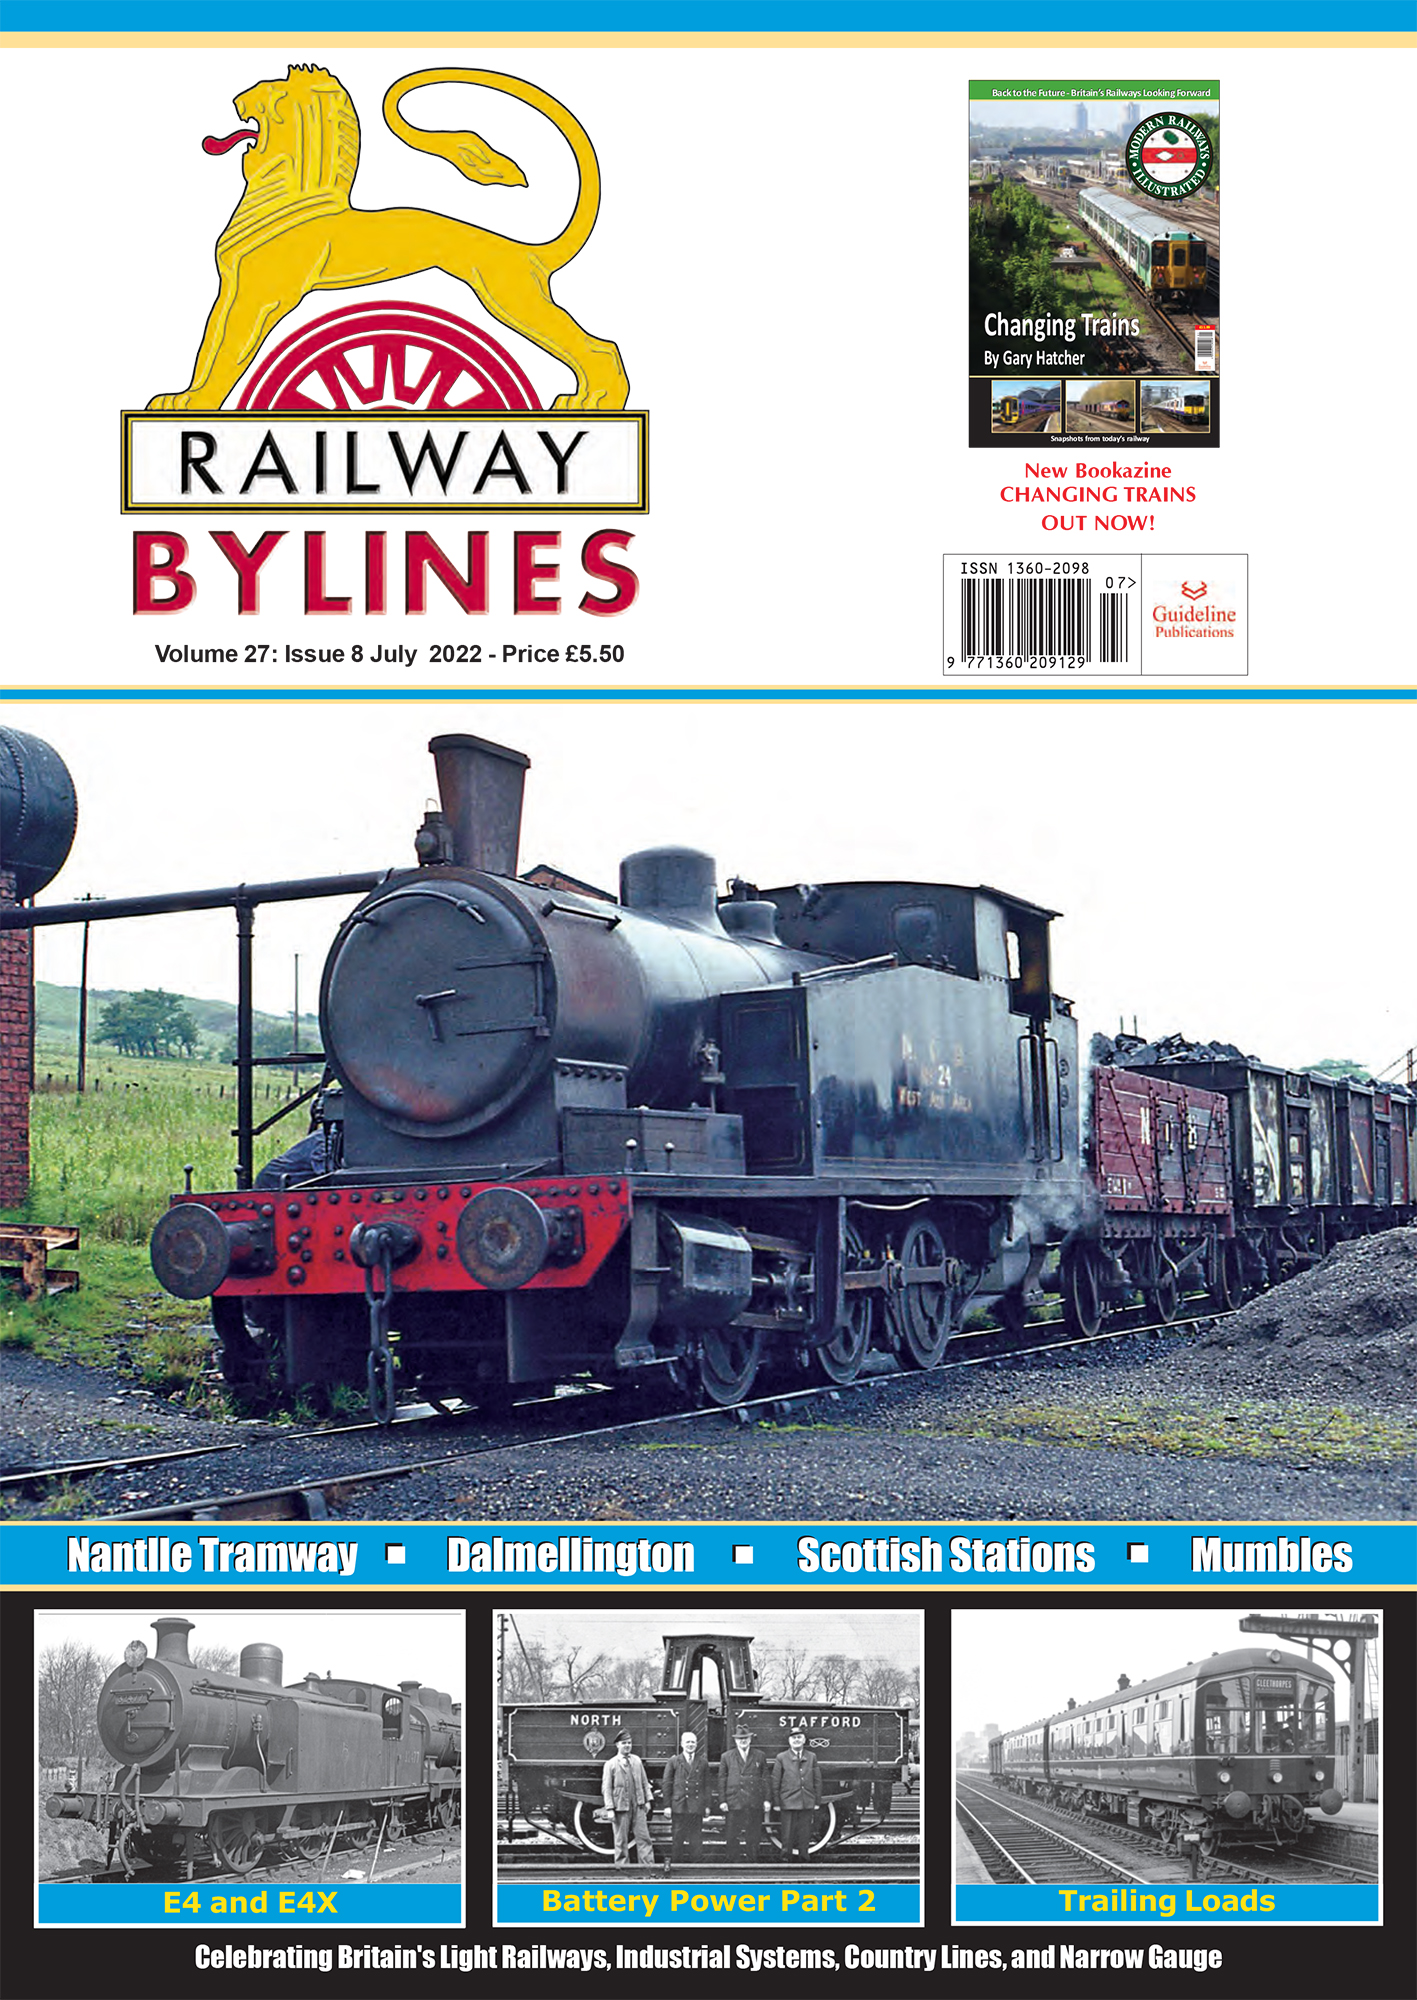 Guideline Publications Ltd Railway Bylines  vol 27 - issue 08 July 22 